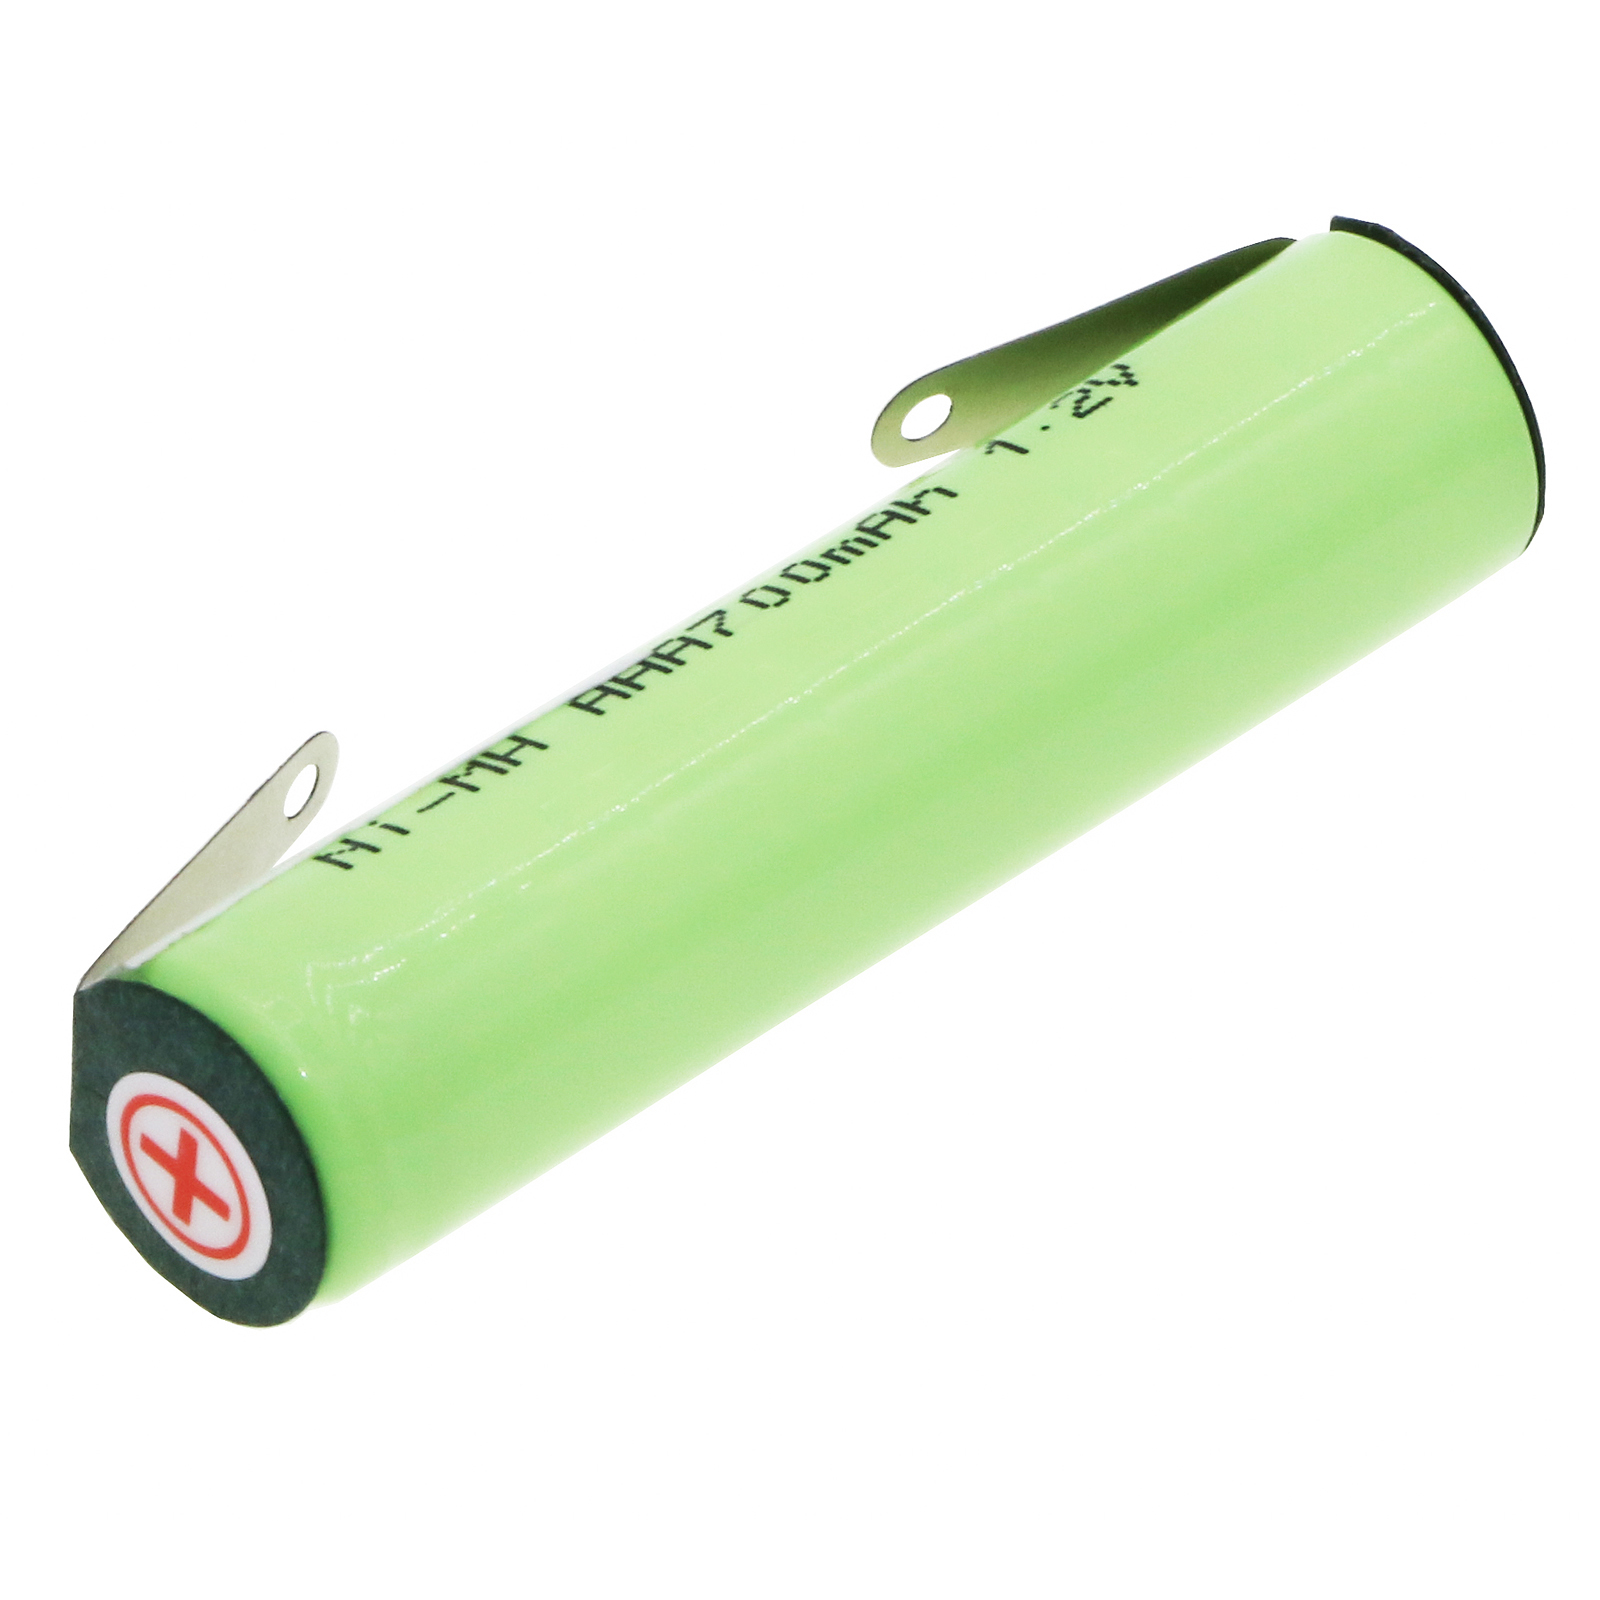 Synergy Digital Shaver Battery, Compatible with Braun 4HGAE-LFU Shaver Battery (Ni-MH, 1.2V, 700mAh)